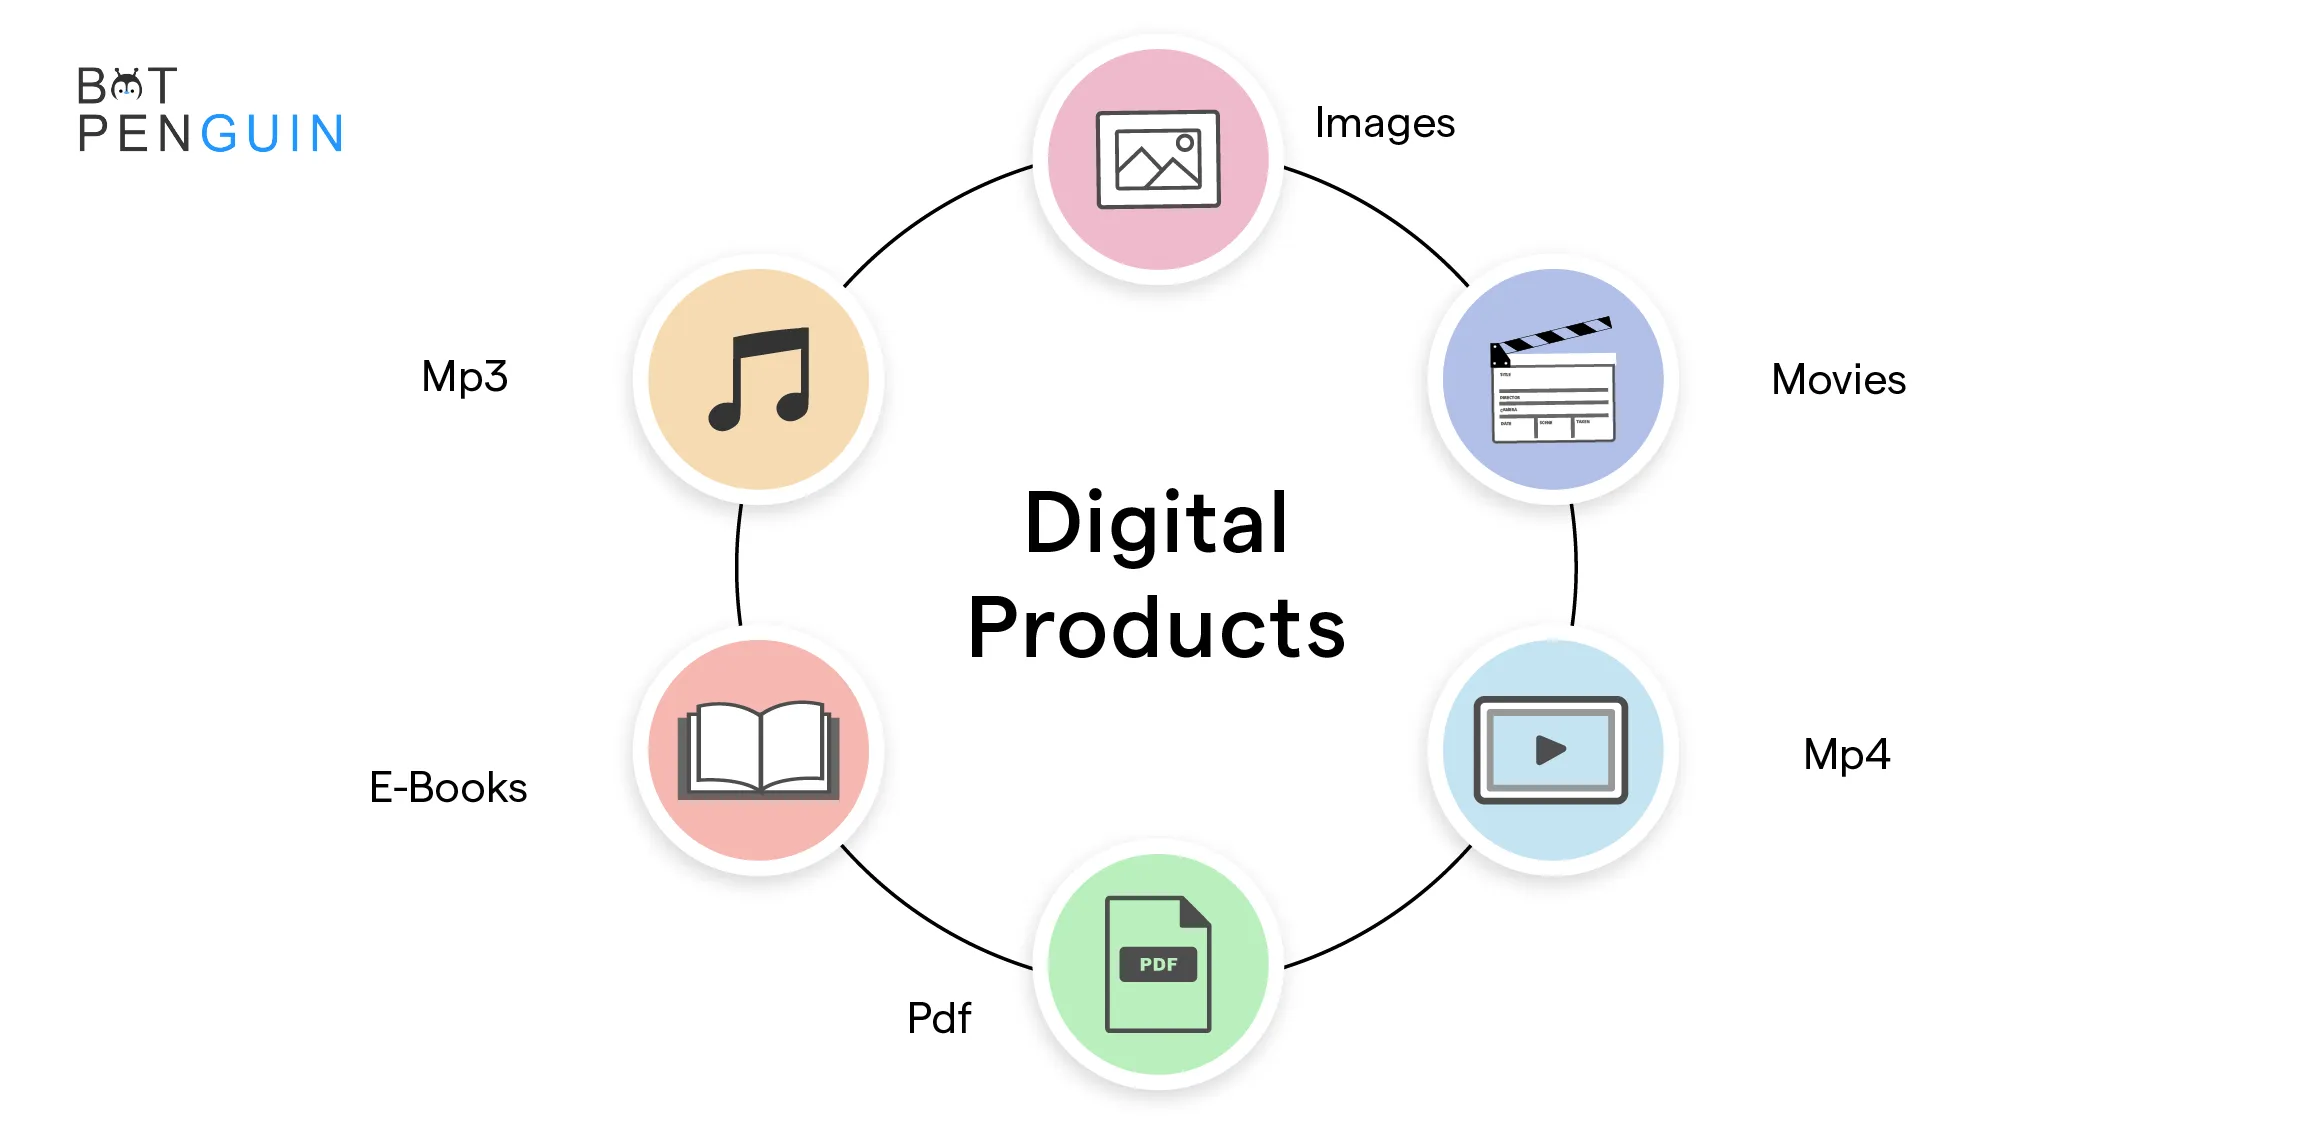 What are Digital Products